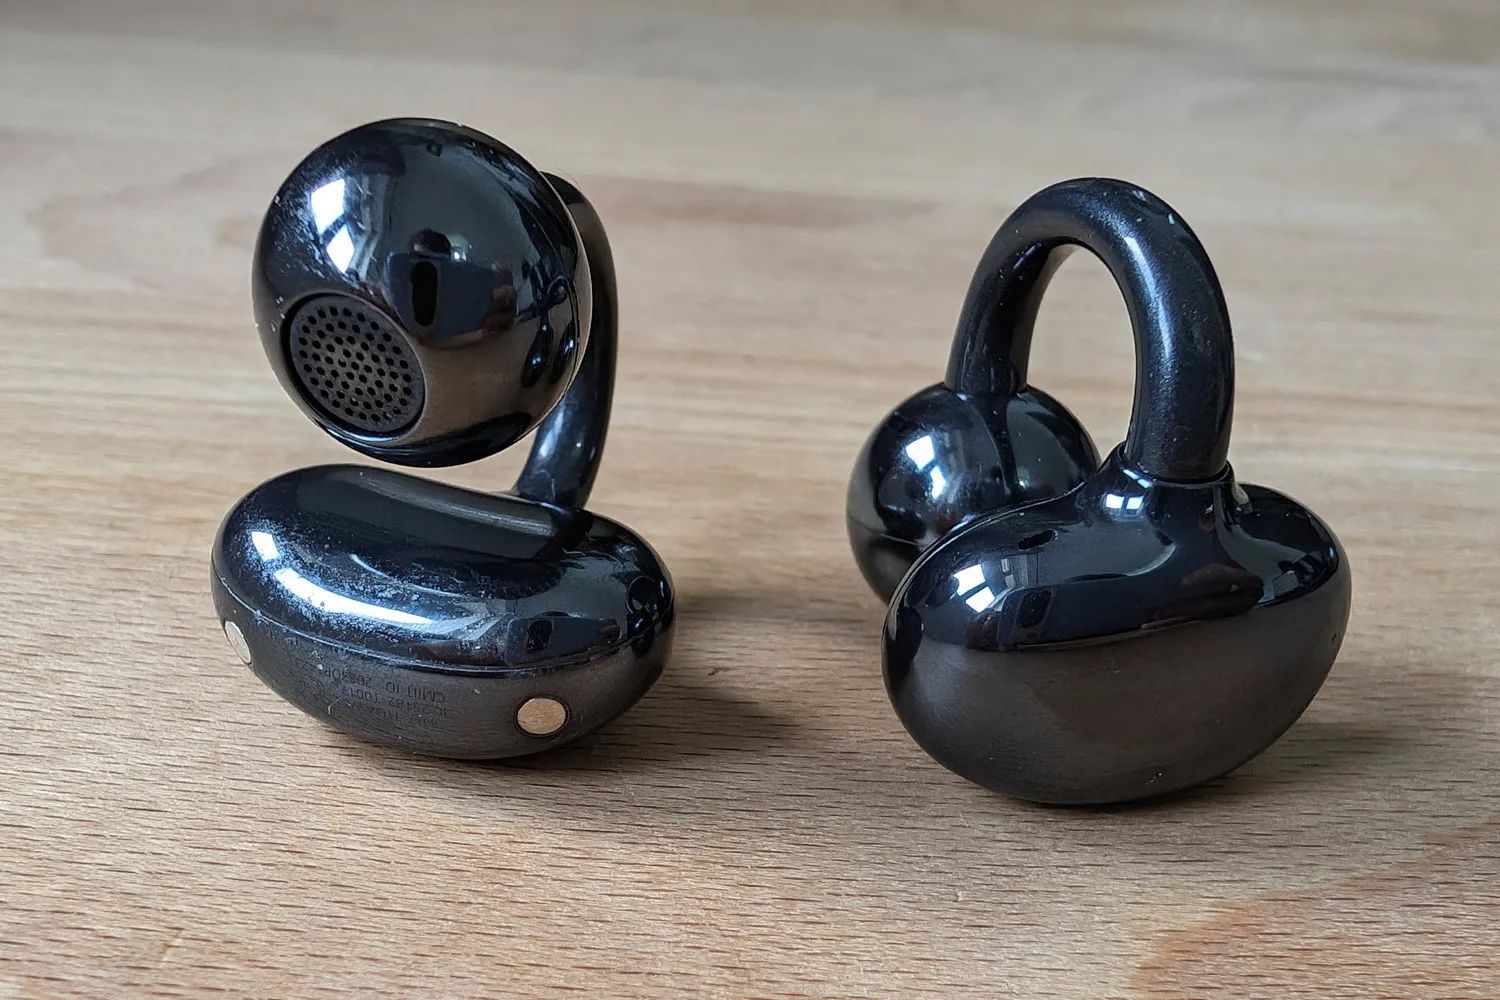 HUAWEI FreeClip Review: Unmatched comfort for earbuds